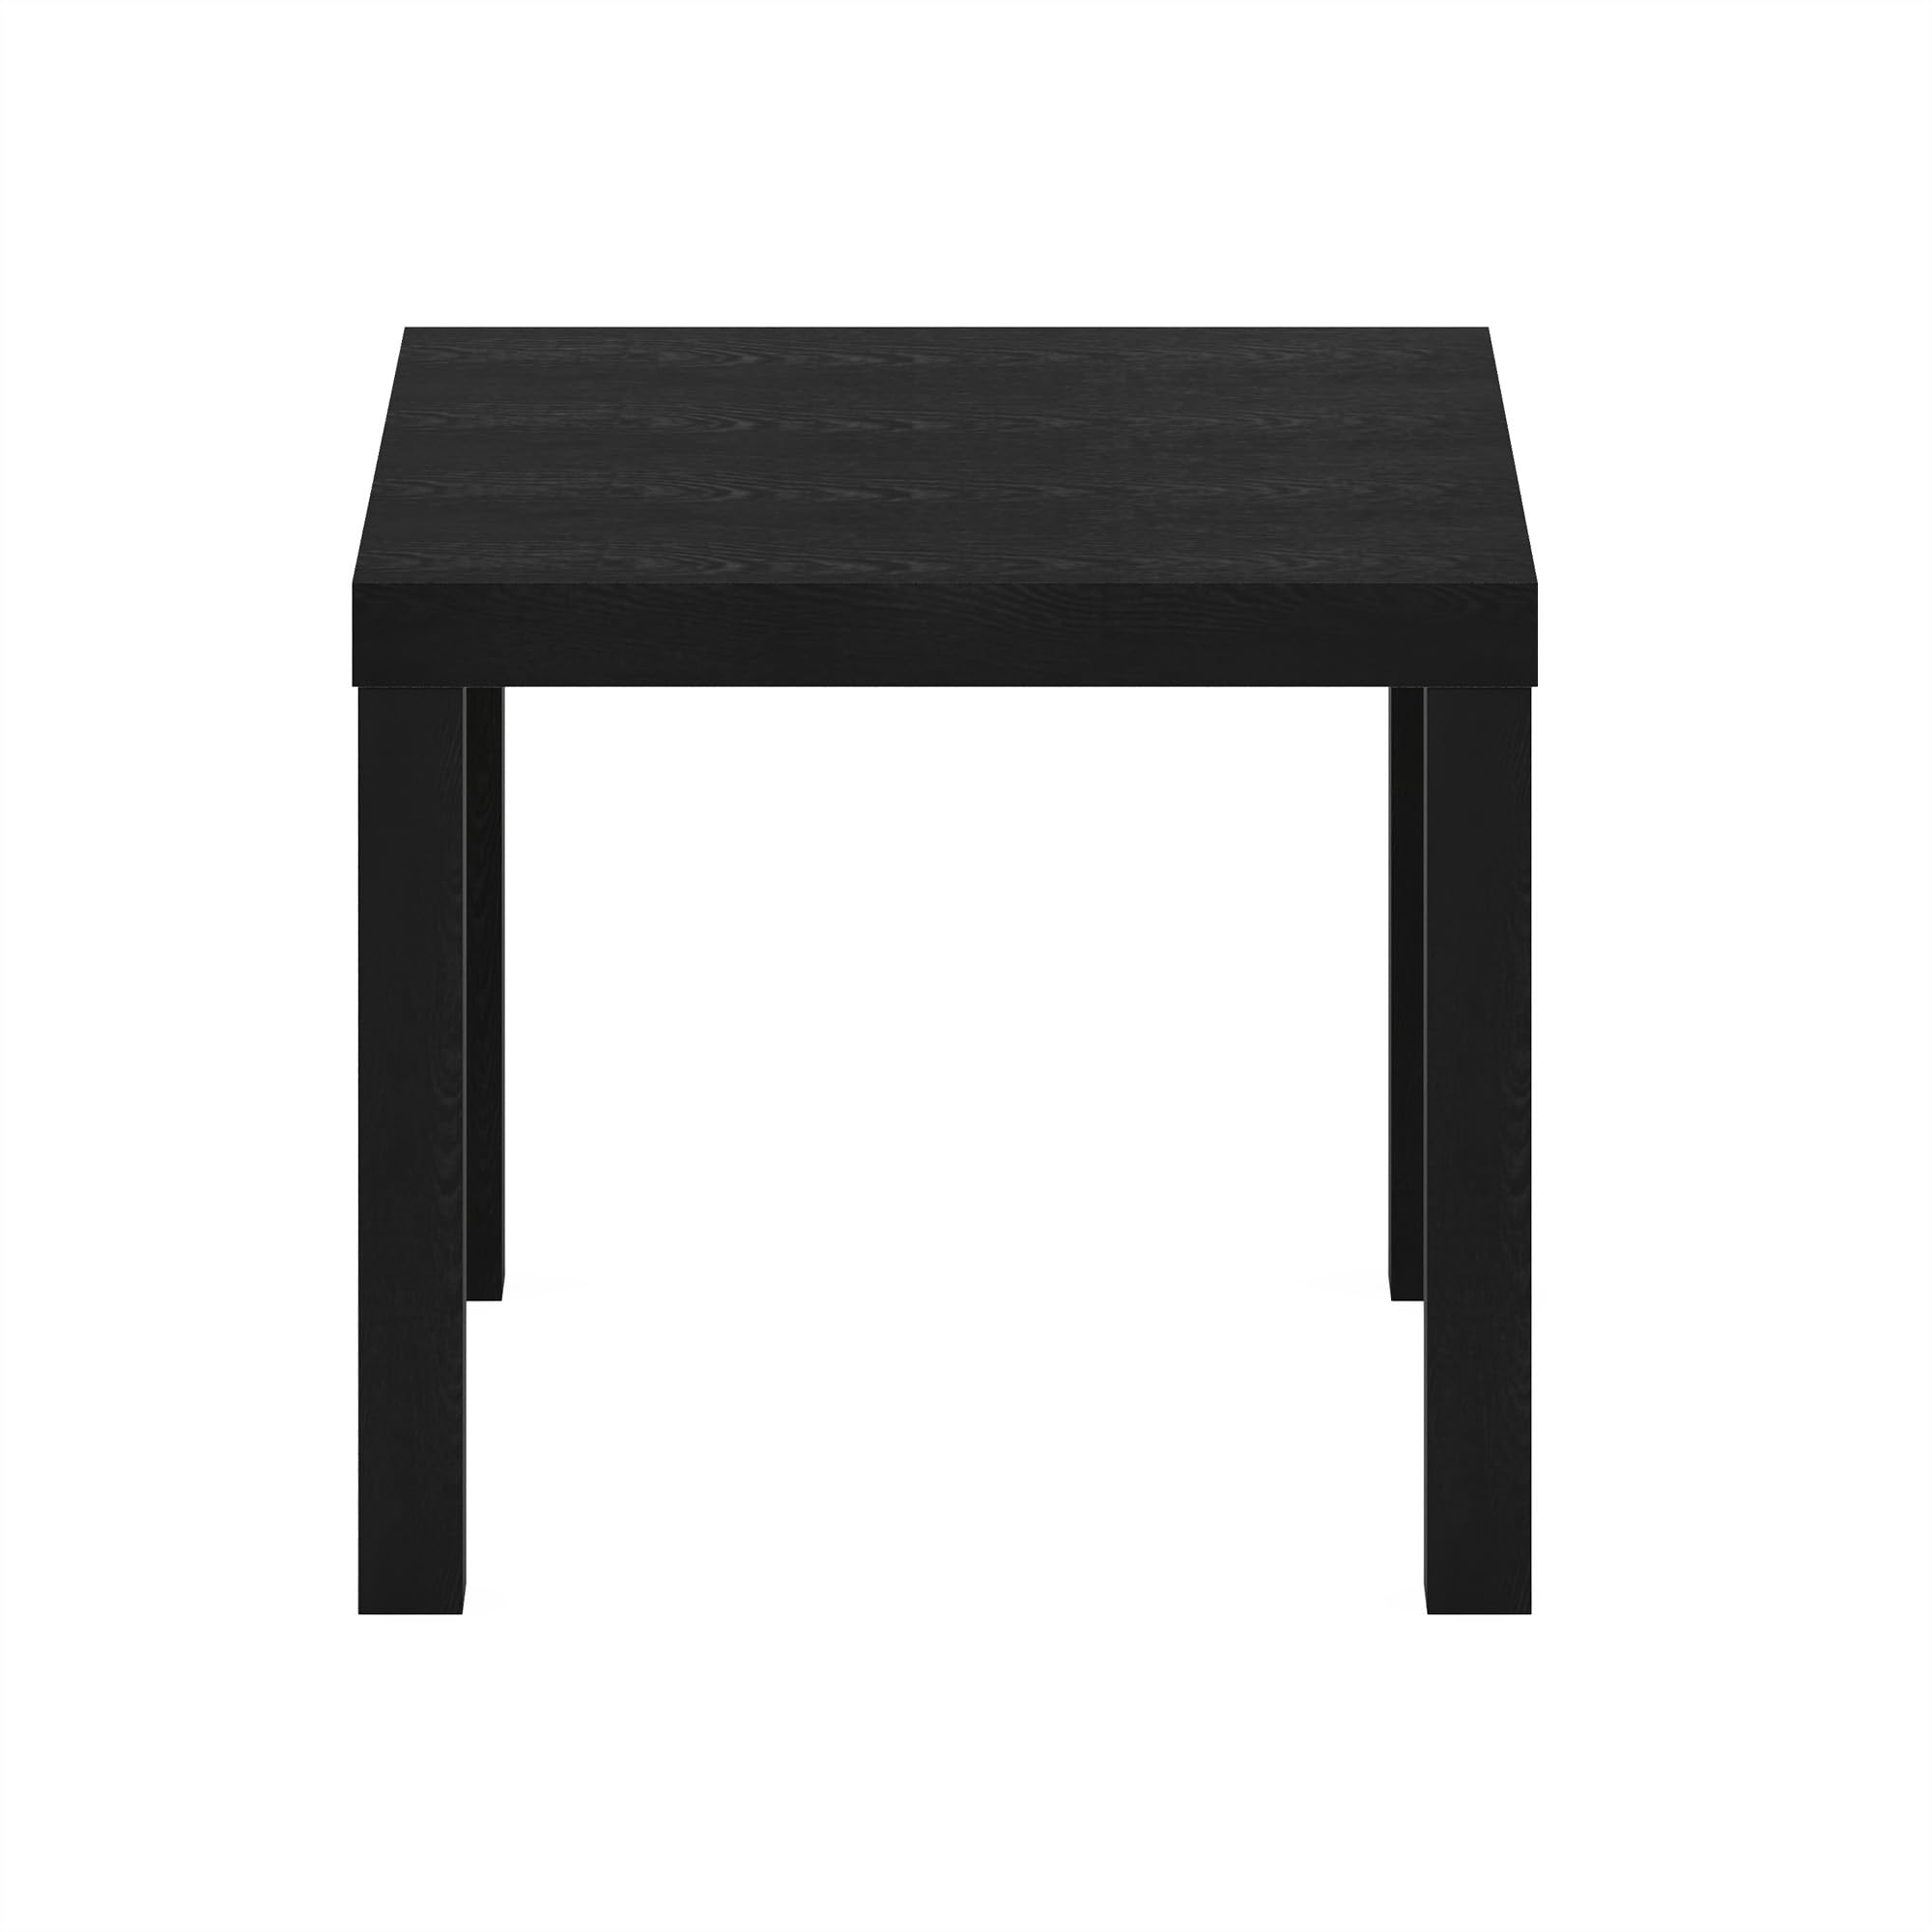 Furinno Classic Homey Square Parsons Side End Table, 1, Black